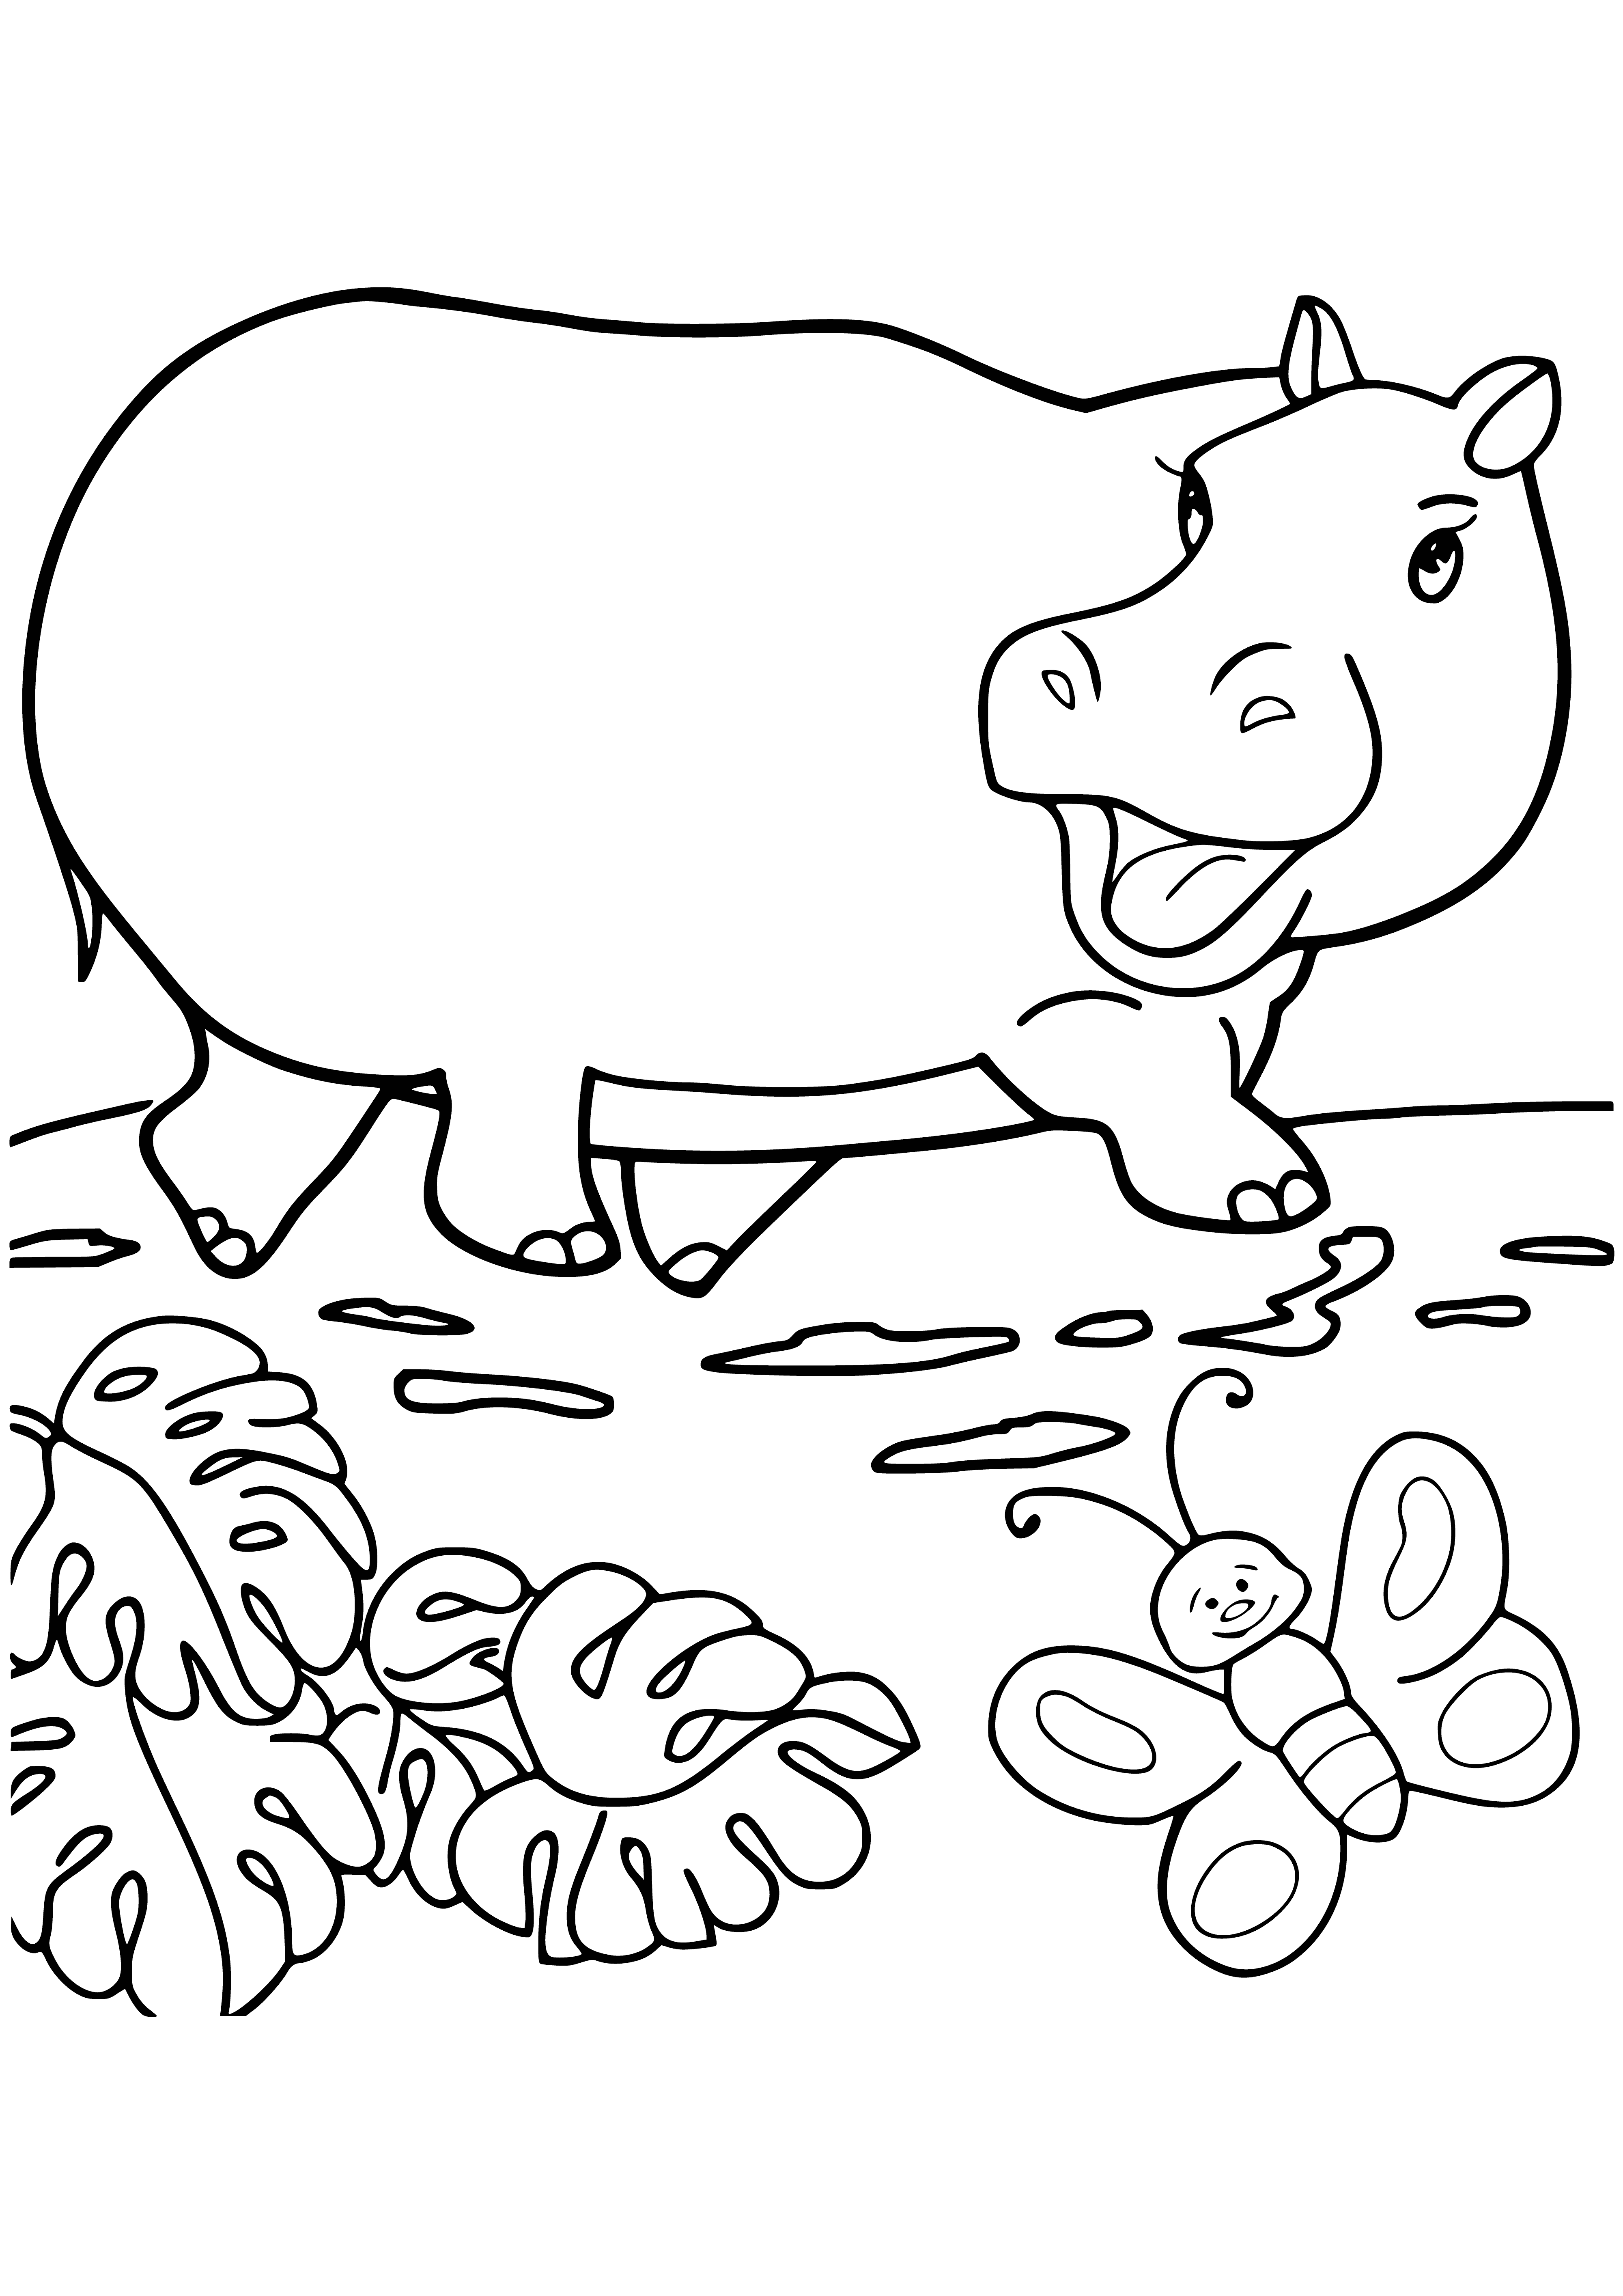 coloring page: Mammoth Hippo and her baby standing in a river, with water up to her belly. Big, grayish-brown body and open mouth showing big teeth. Small eyes and big ears.